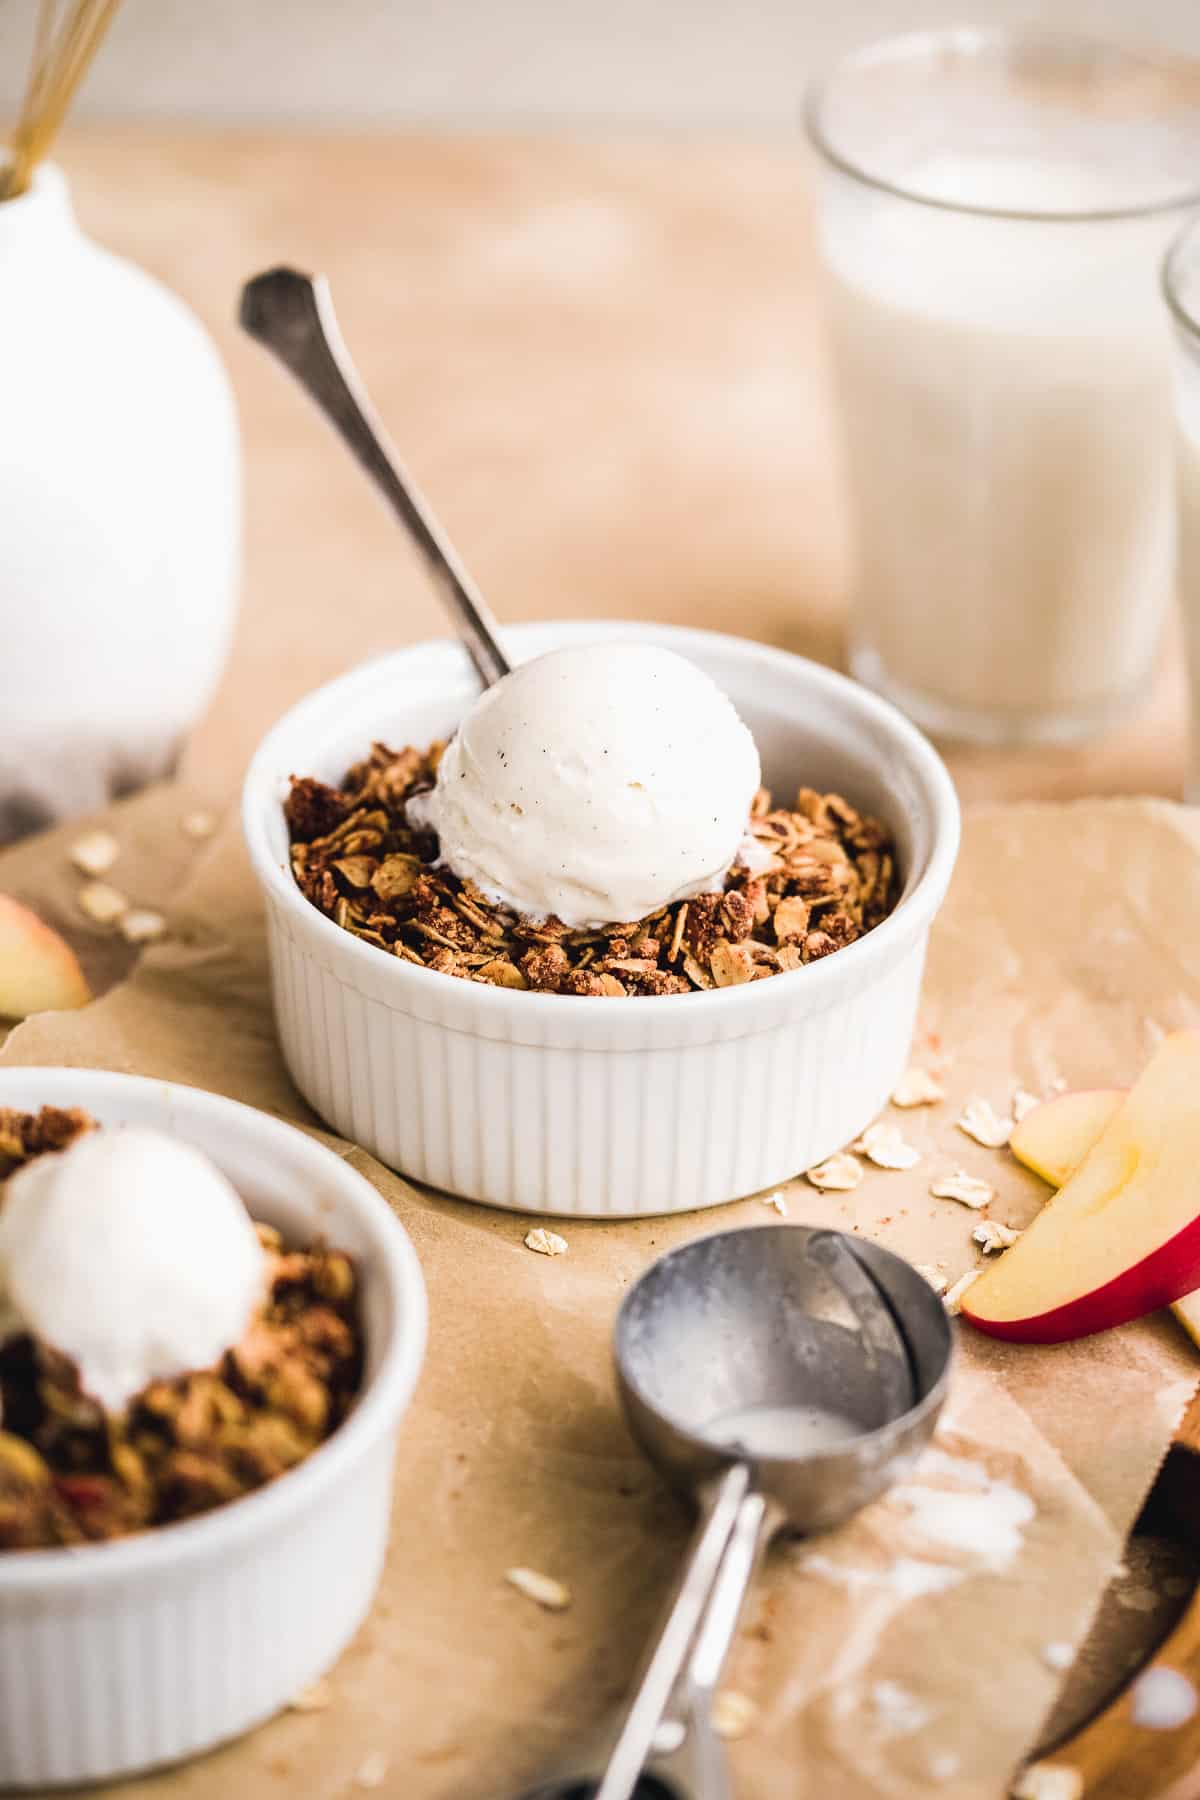 Side view photo of a white ramekin with  freshly baked apple crisp topped with vanilla ice cream.  An ice cream scoop, slices of apple and glass of milk are in the background.  